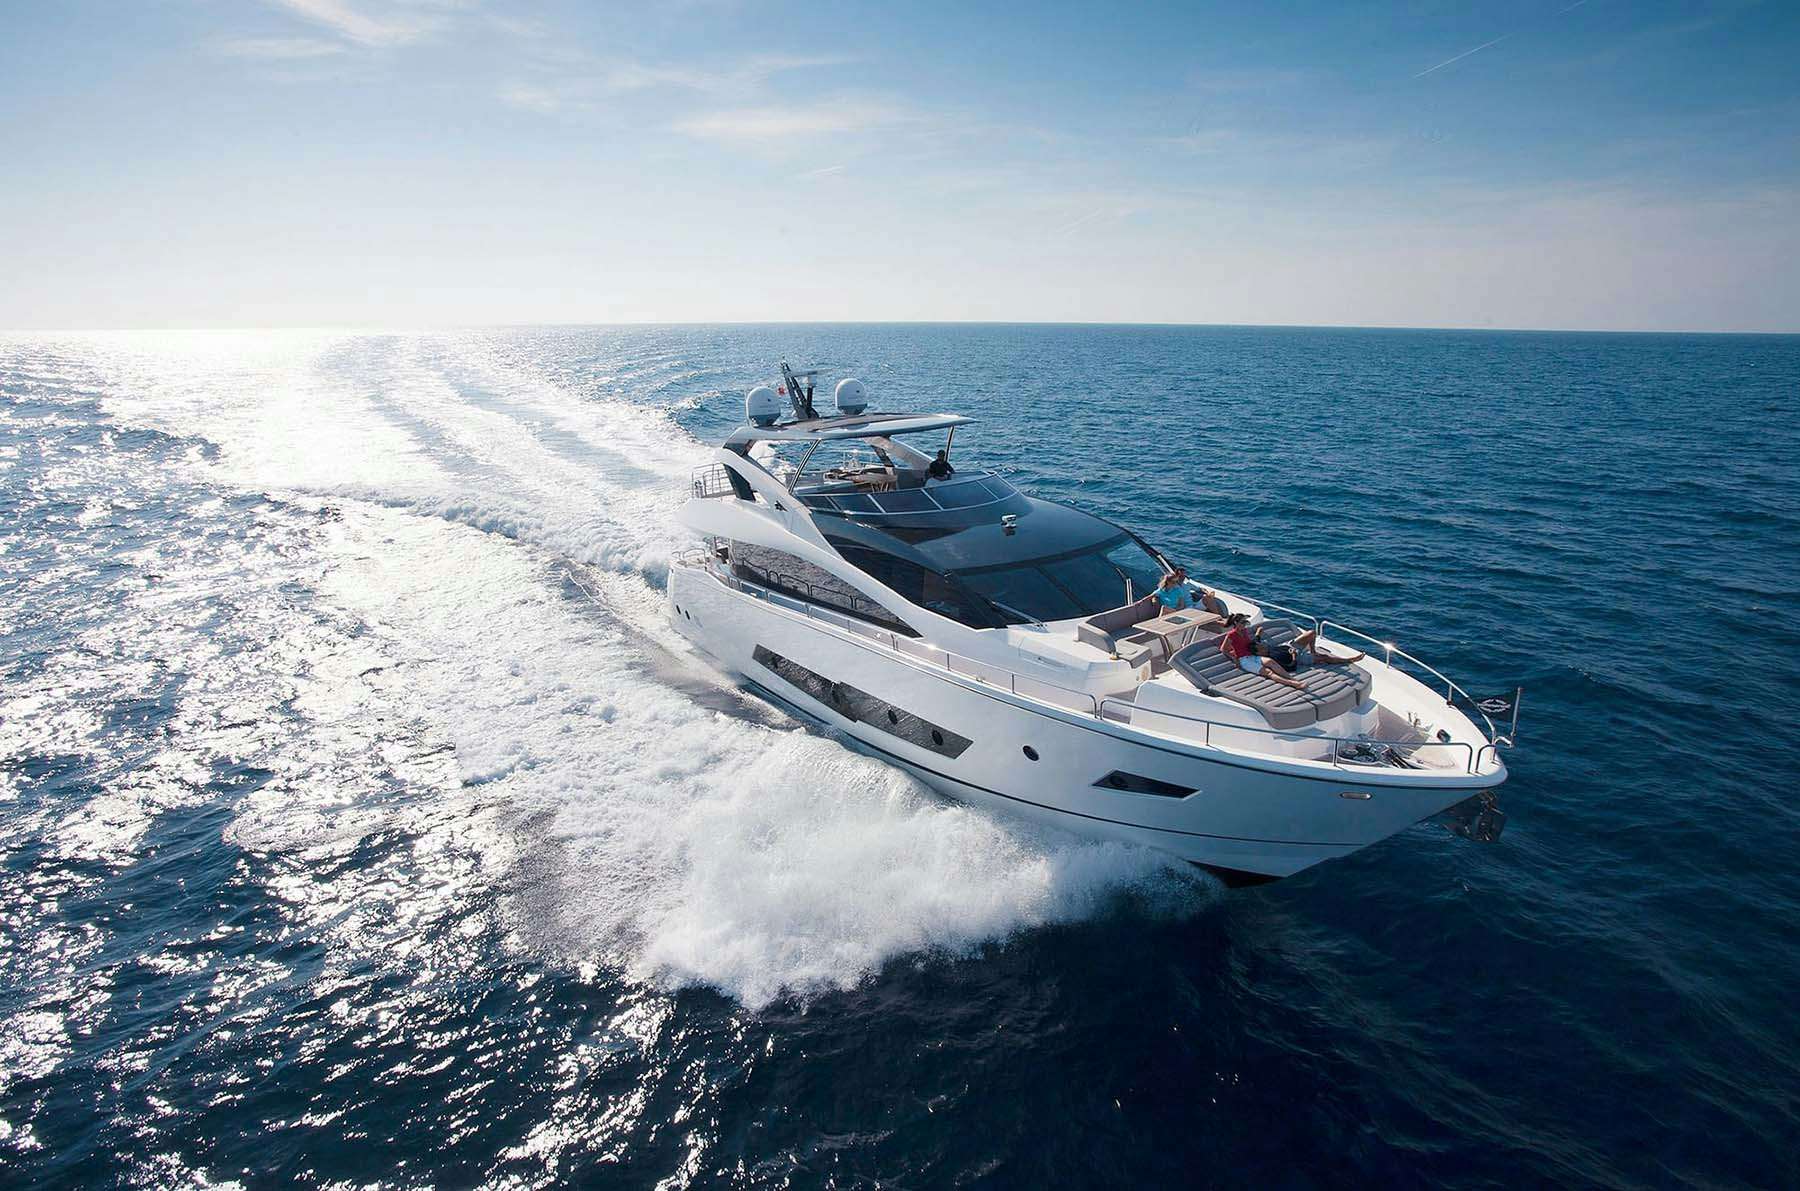 INSOMNIA Sunseeker yacht for charter crusing